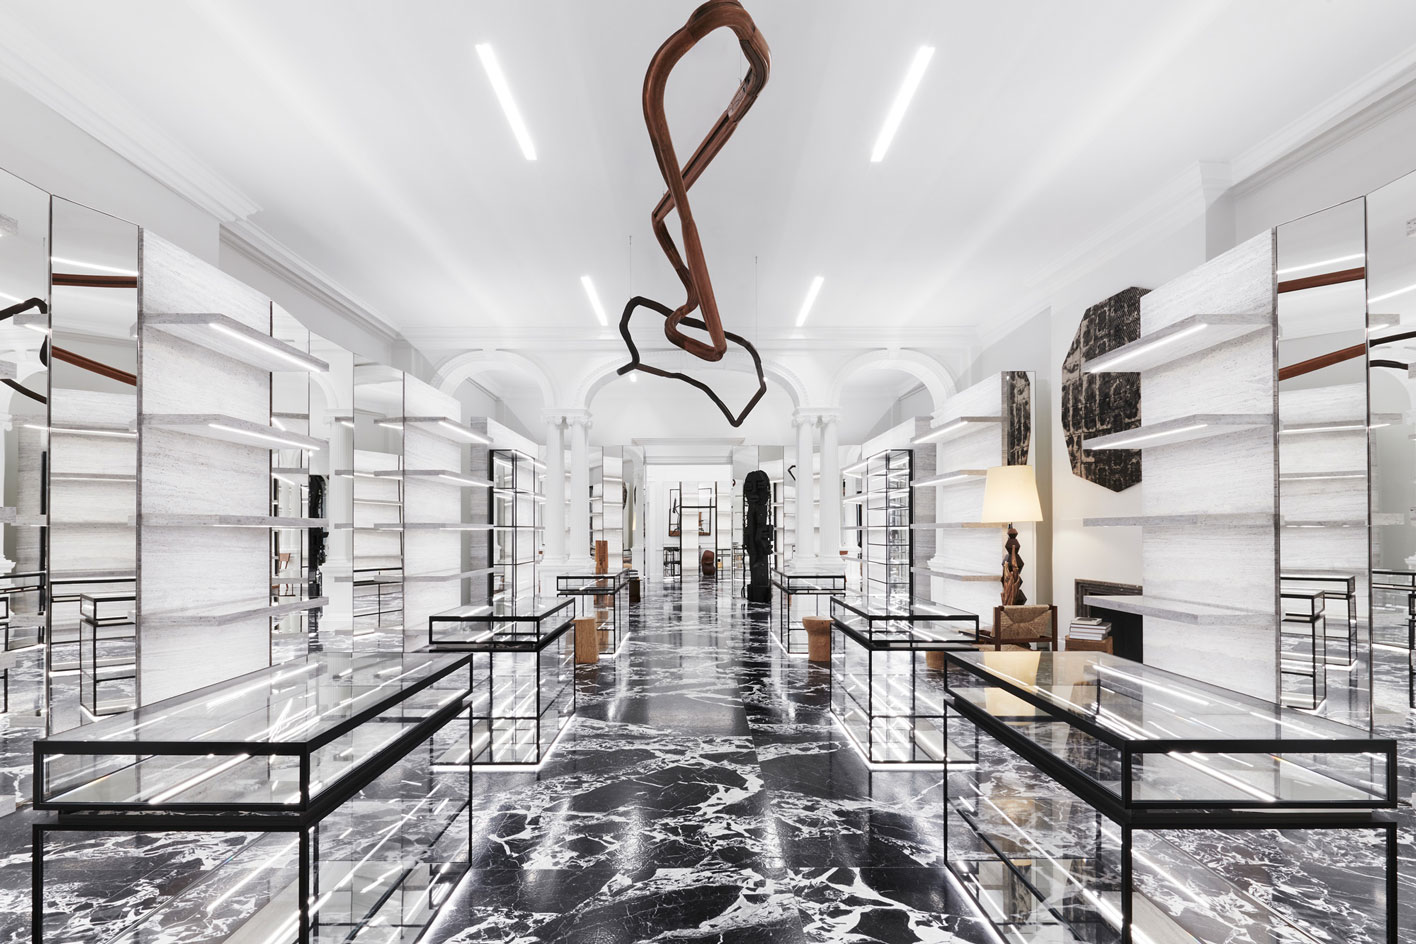 Hedi Slimane's New Vision for Celine Is on Full Display at the Brand's New  Parisian Store